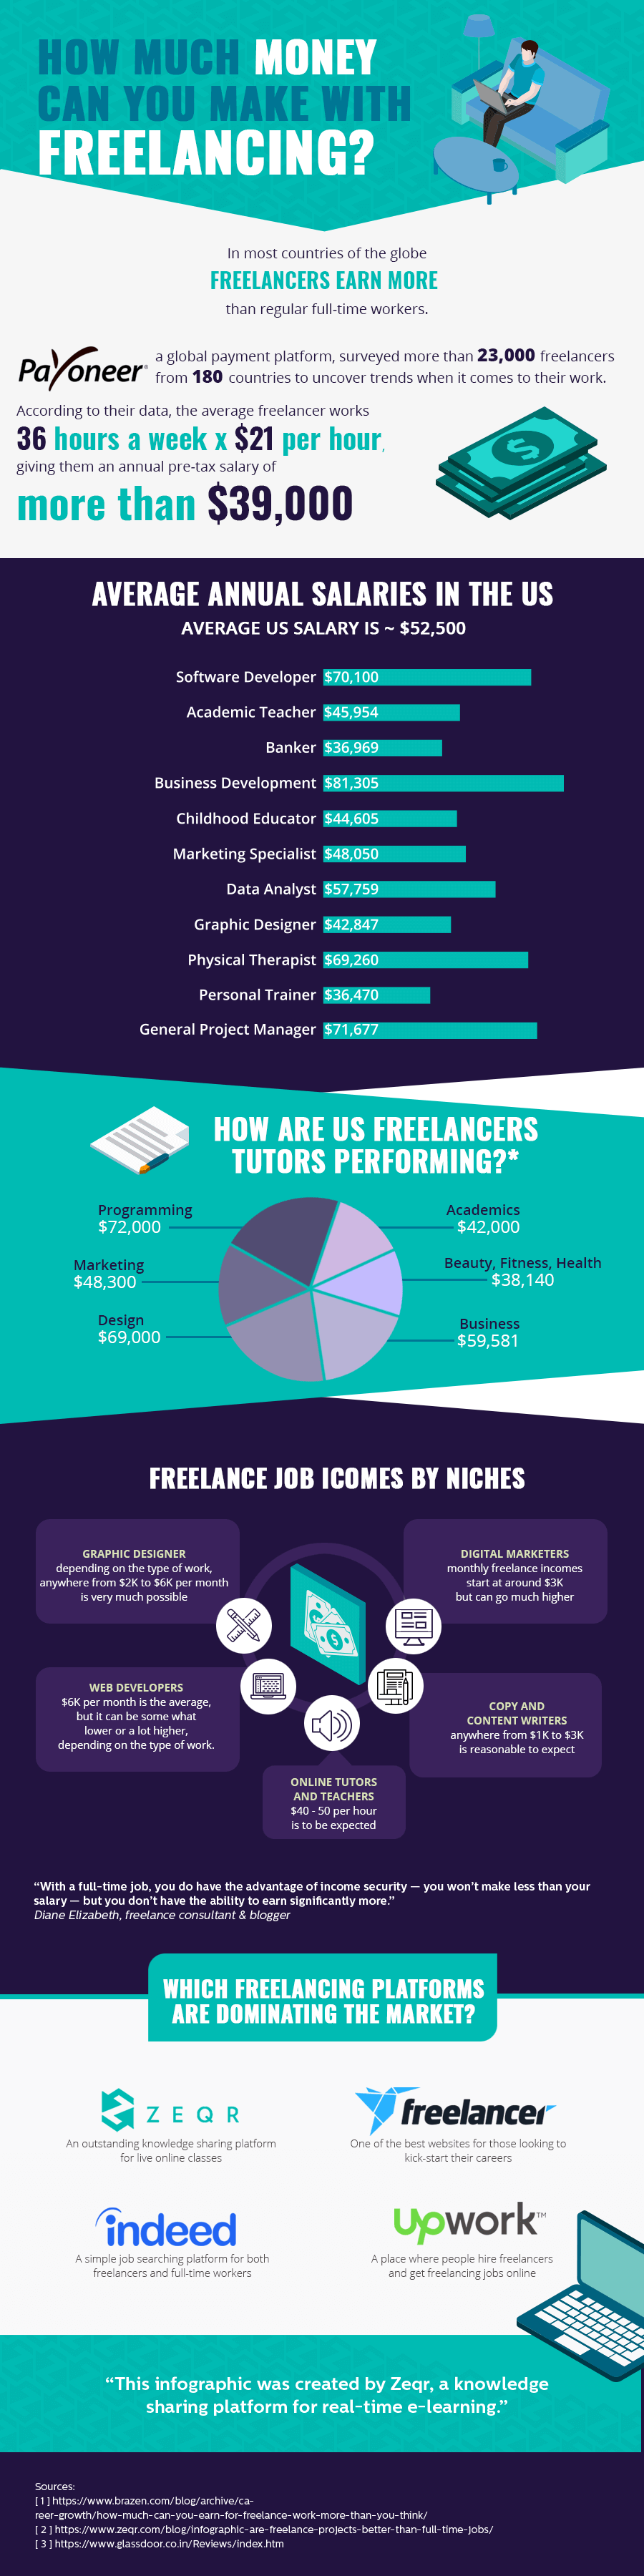 How Much Money Can You Make Freelancing? - #infographic